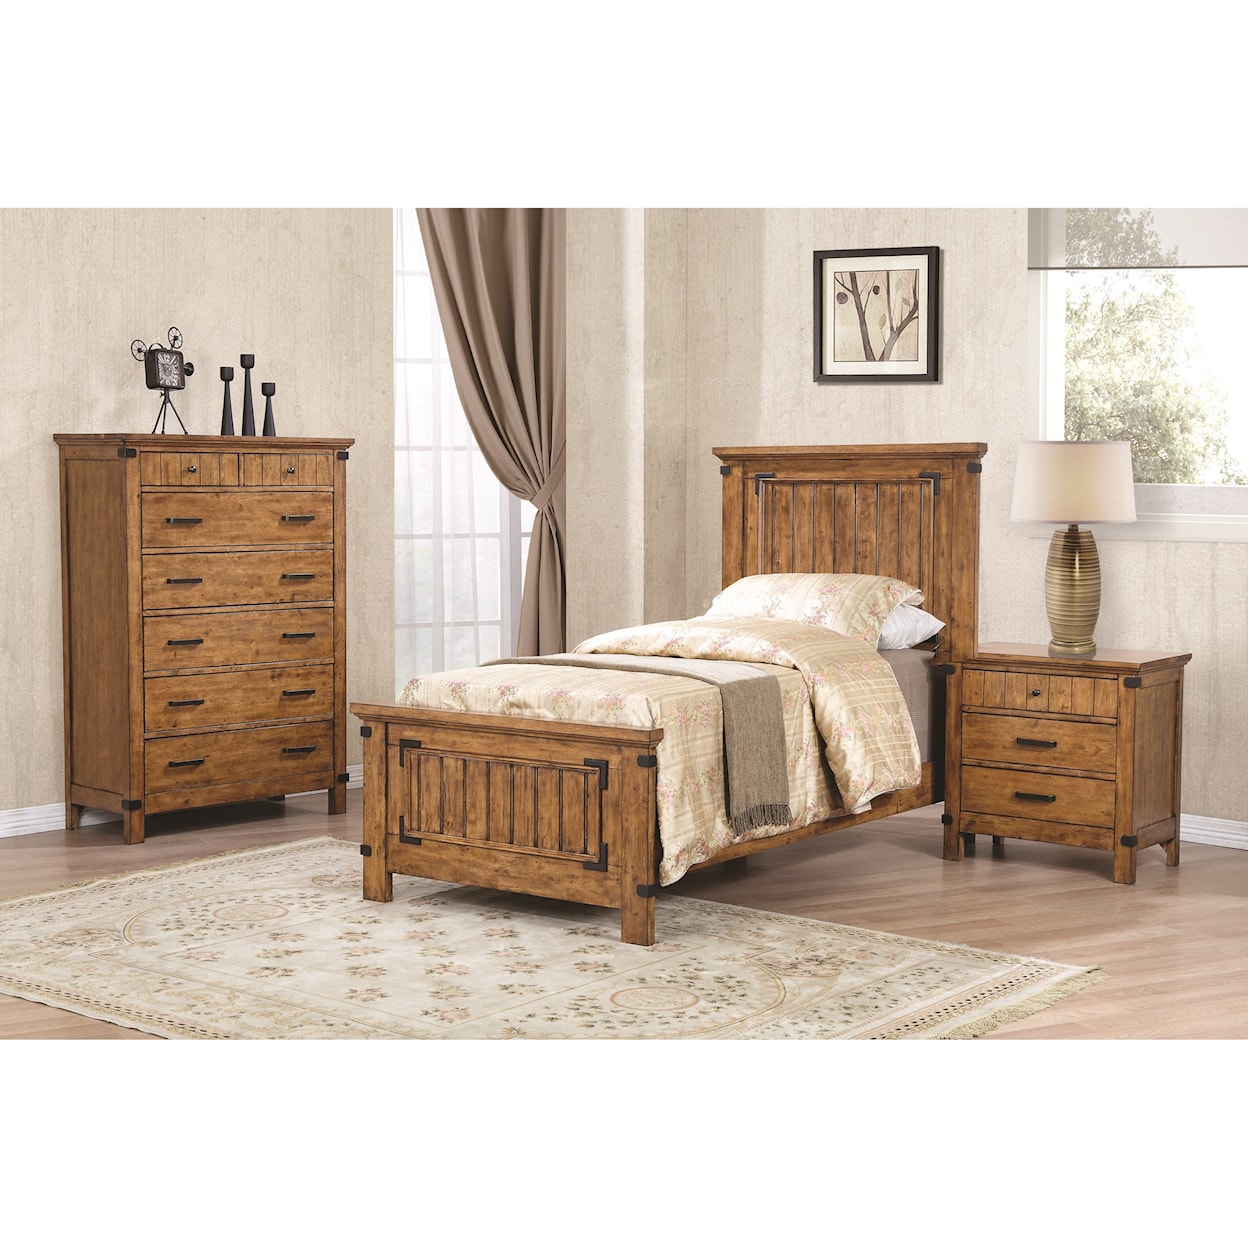 Coaster Brenner Twin Bedroom Group